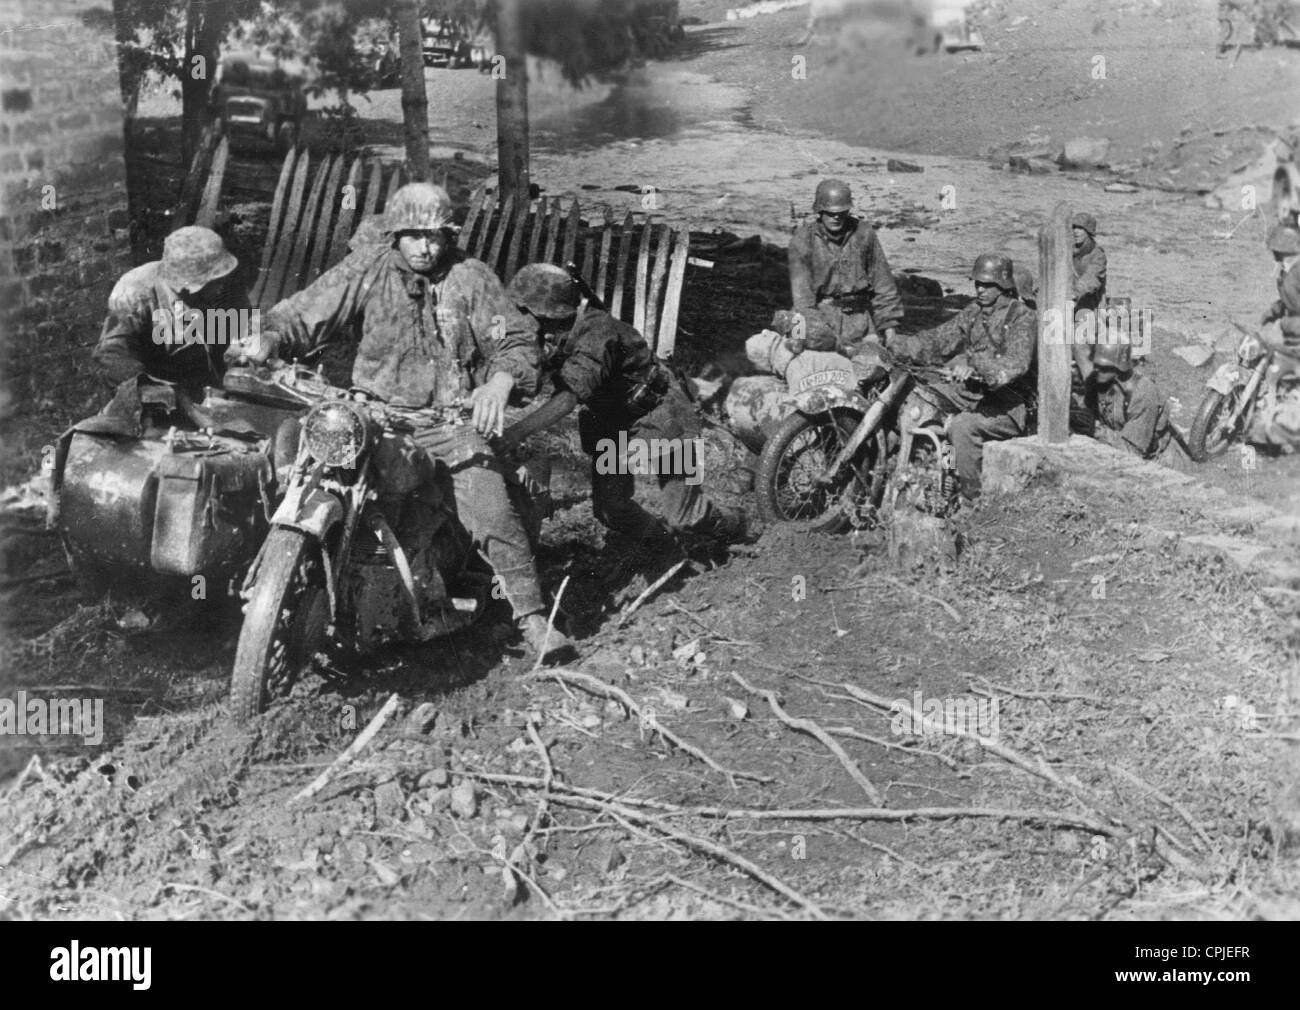 Motorcycle riflemen of the Waffen-SS on the Eastern Front, 1942 Stock Photo